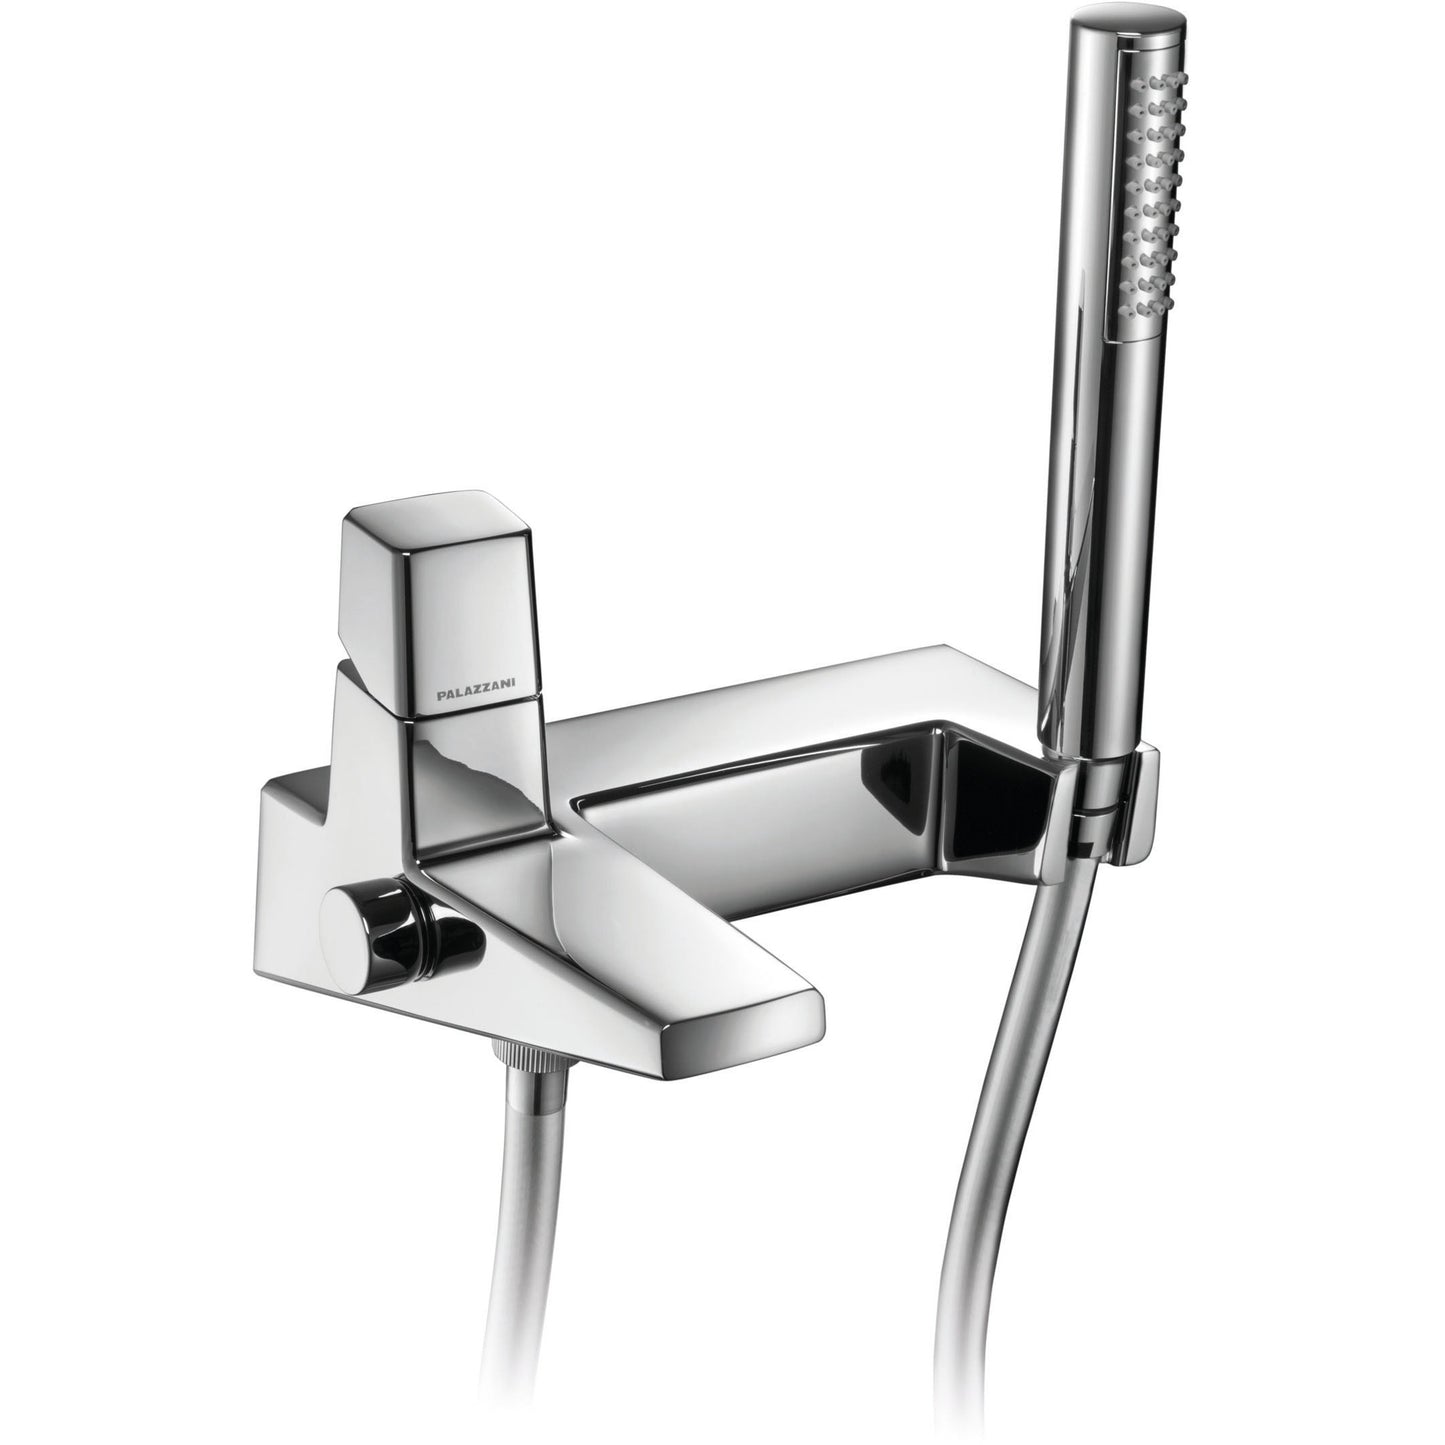 Bath faucet wall mounted Click single lever 371025